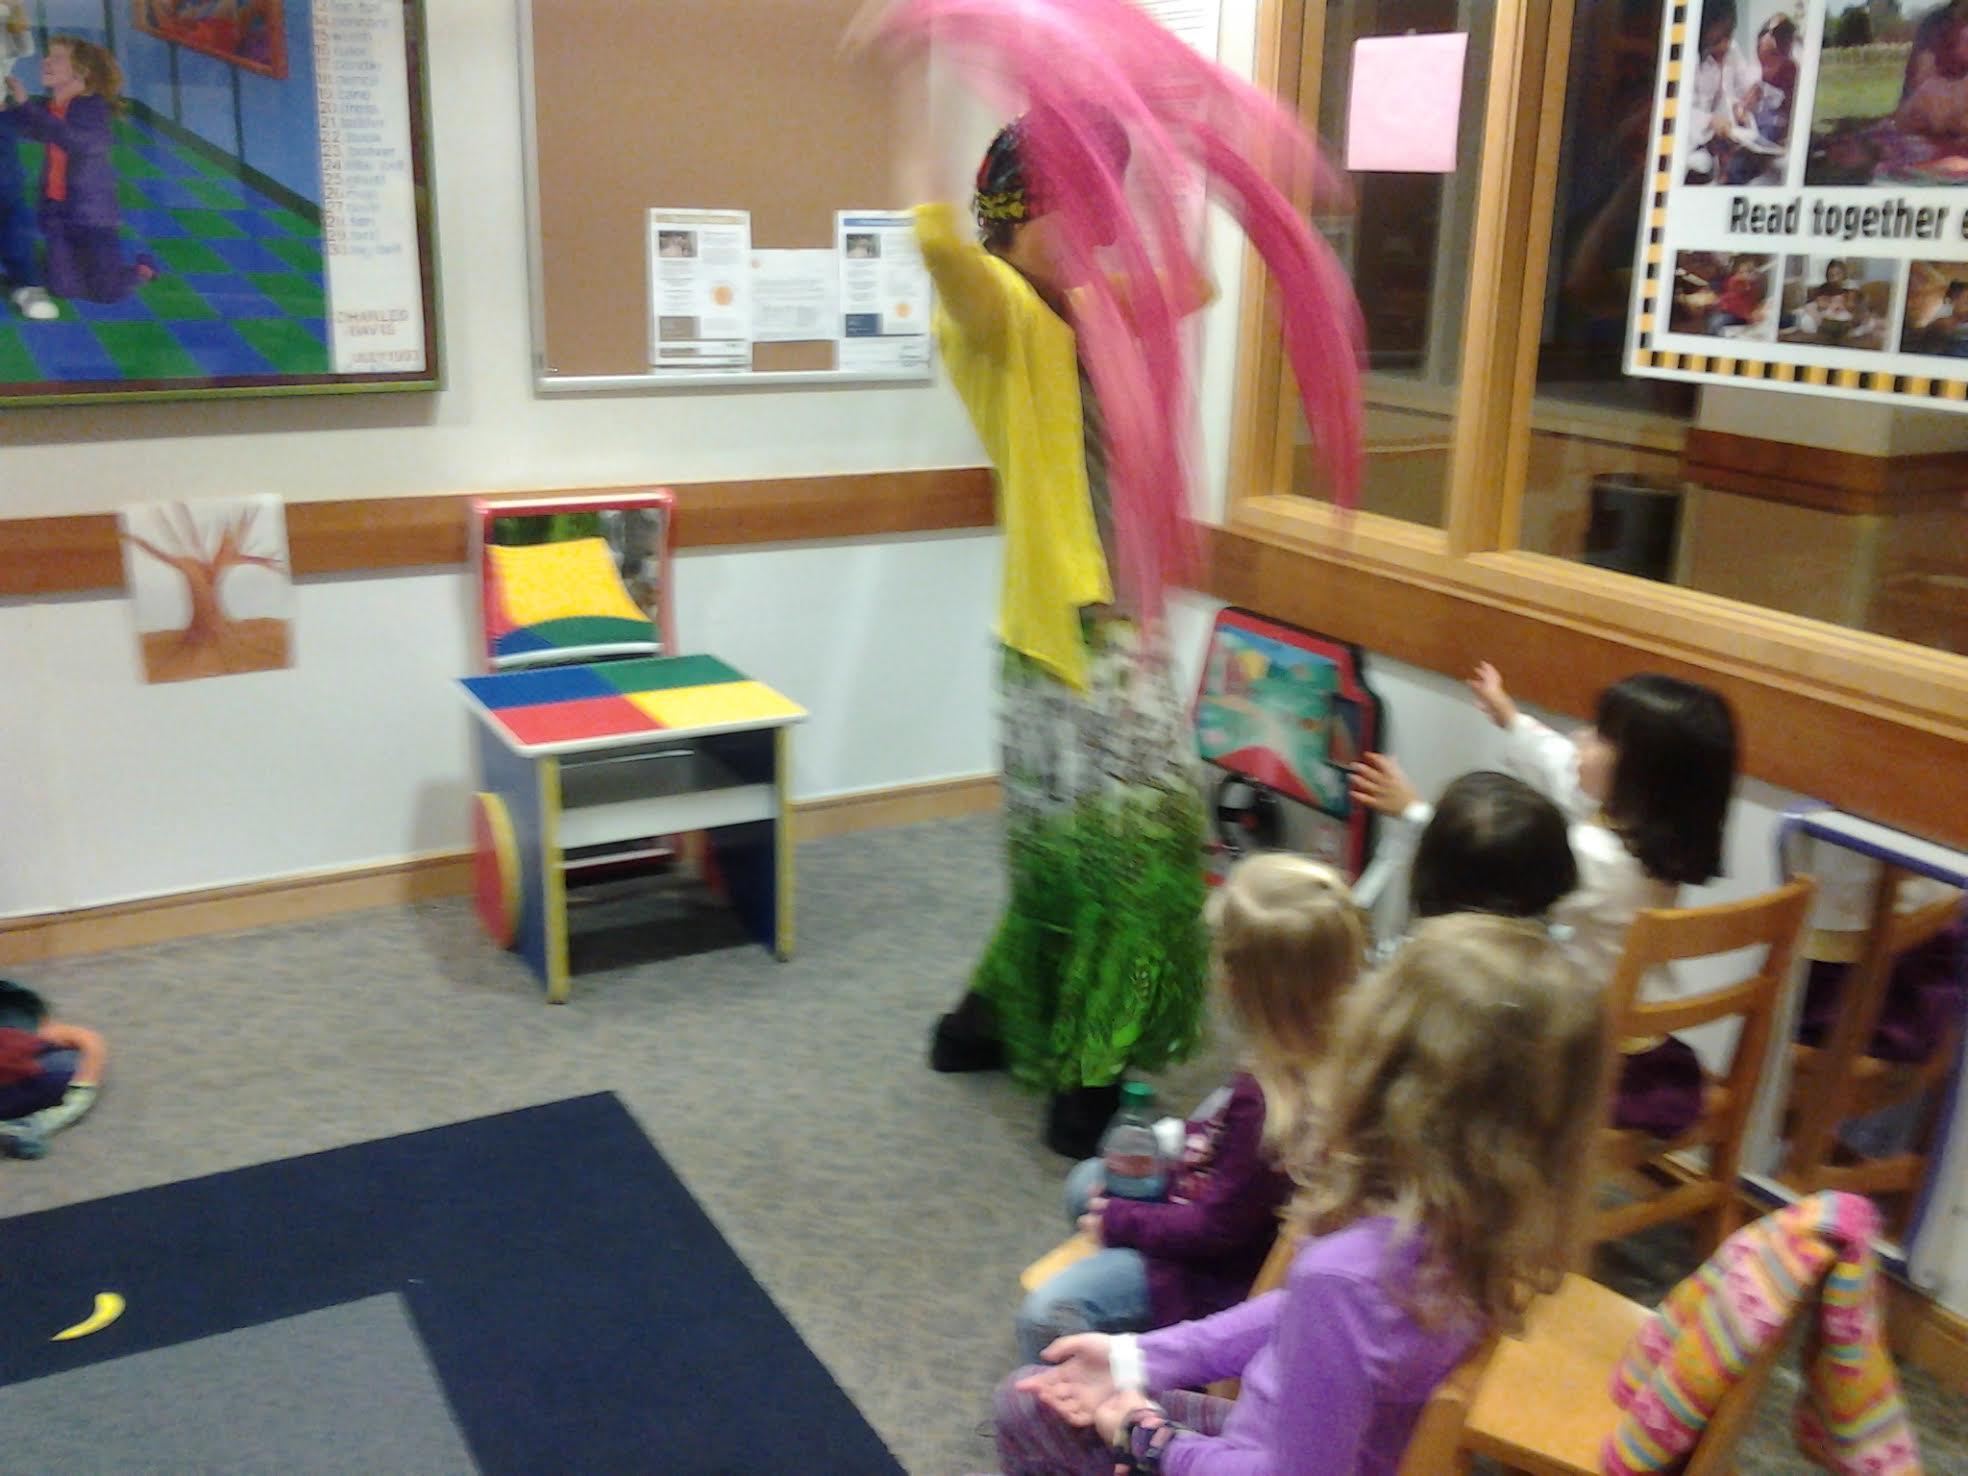 Andrea doing storytelling for children using scarves in a classroom